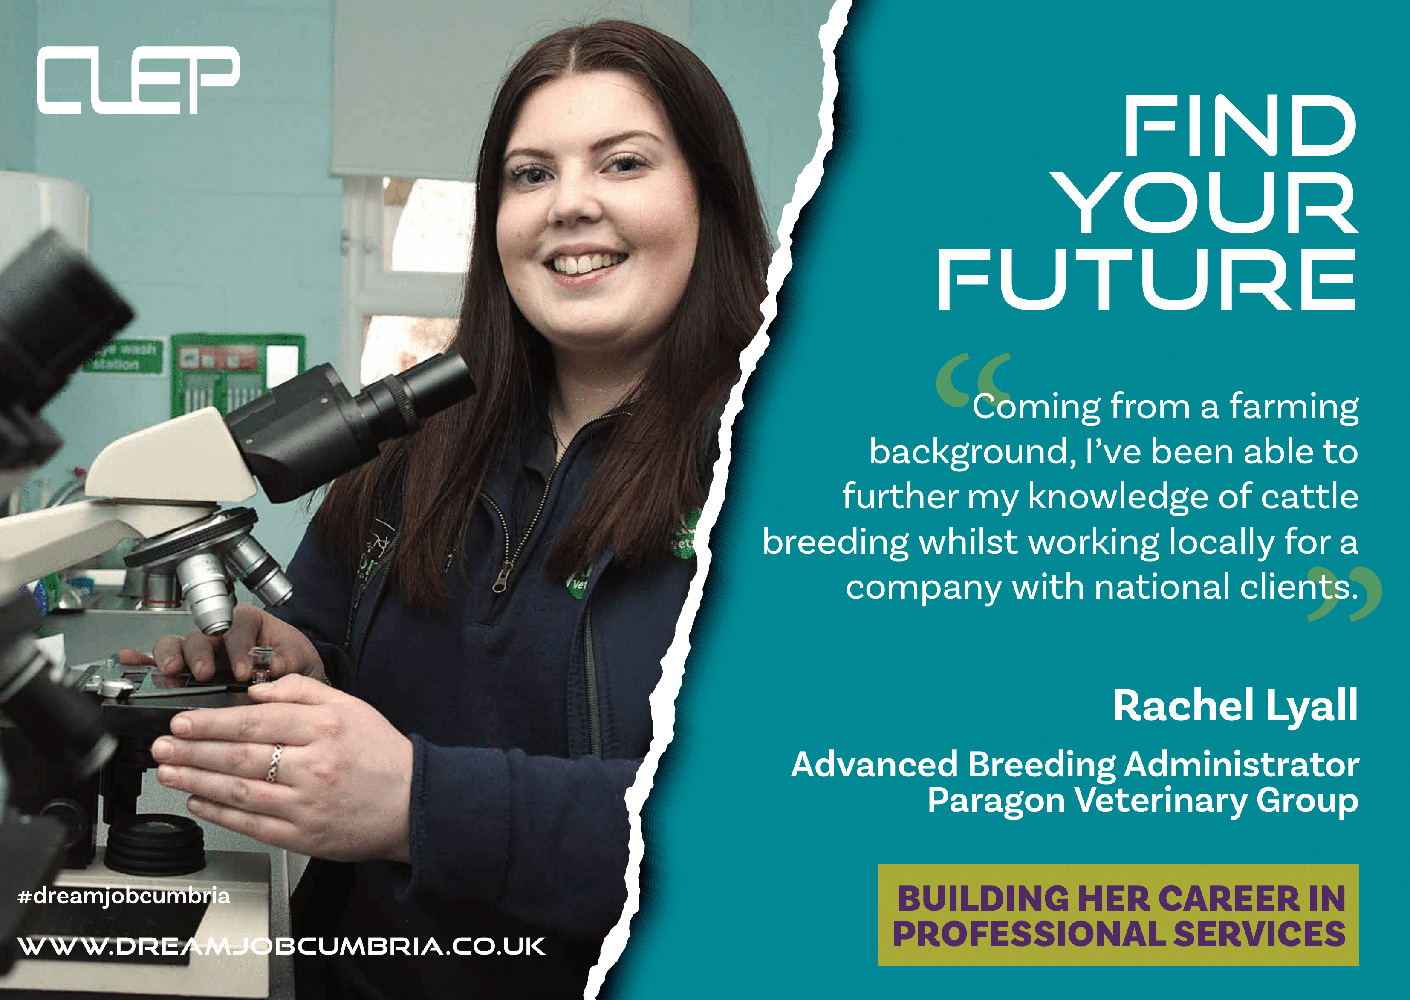 Find your future: Coming from a faming background, I've been able to further my knowledge of cattle breeding whilst working locally for a company with national clients. (Photo of Rachel Lyall)